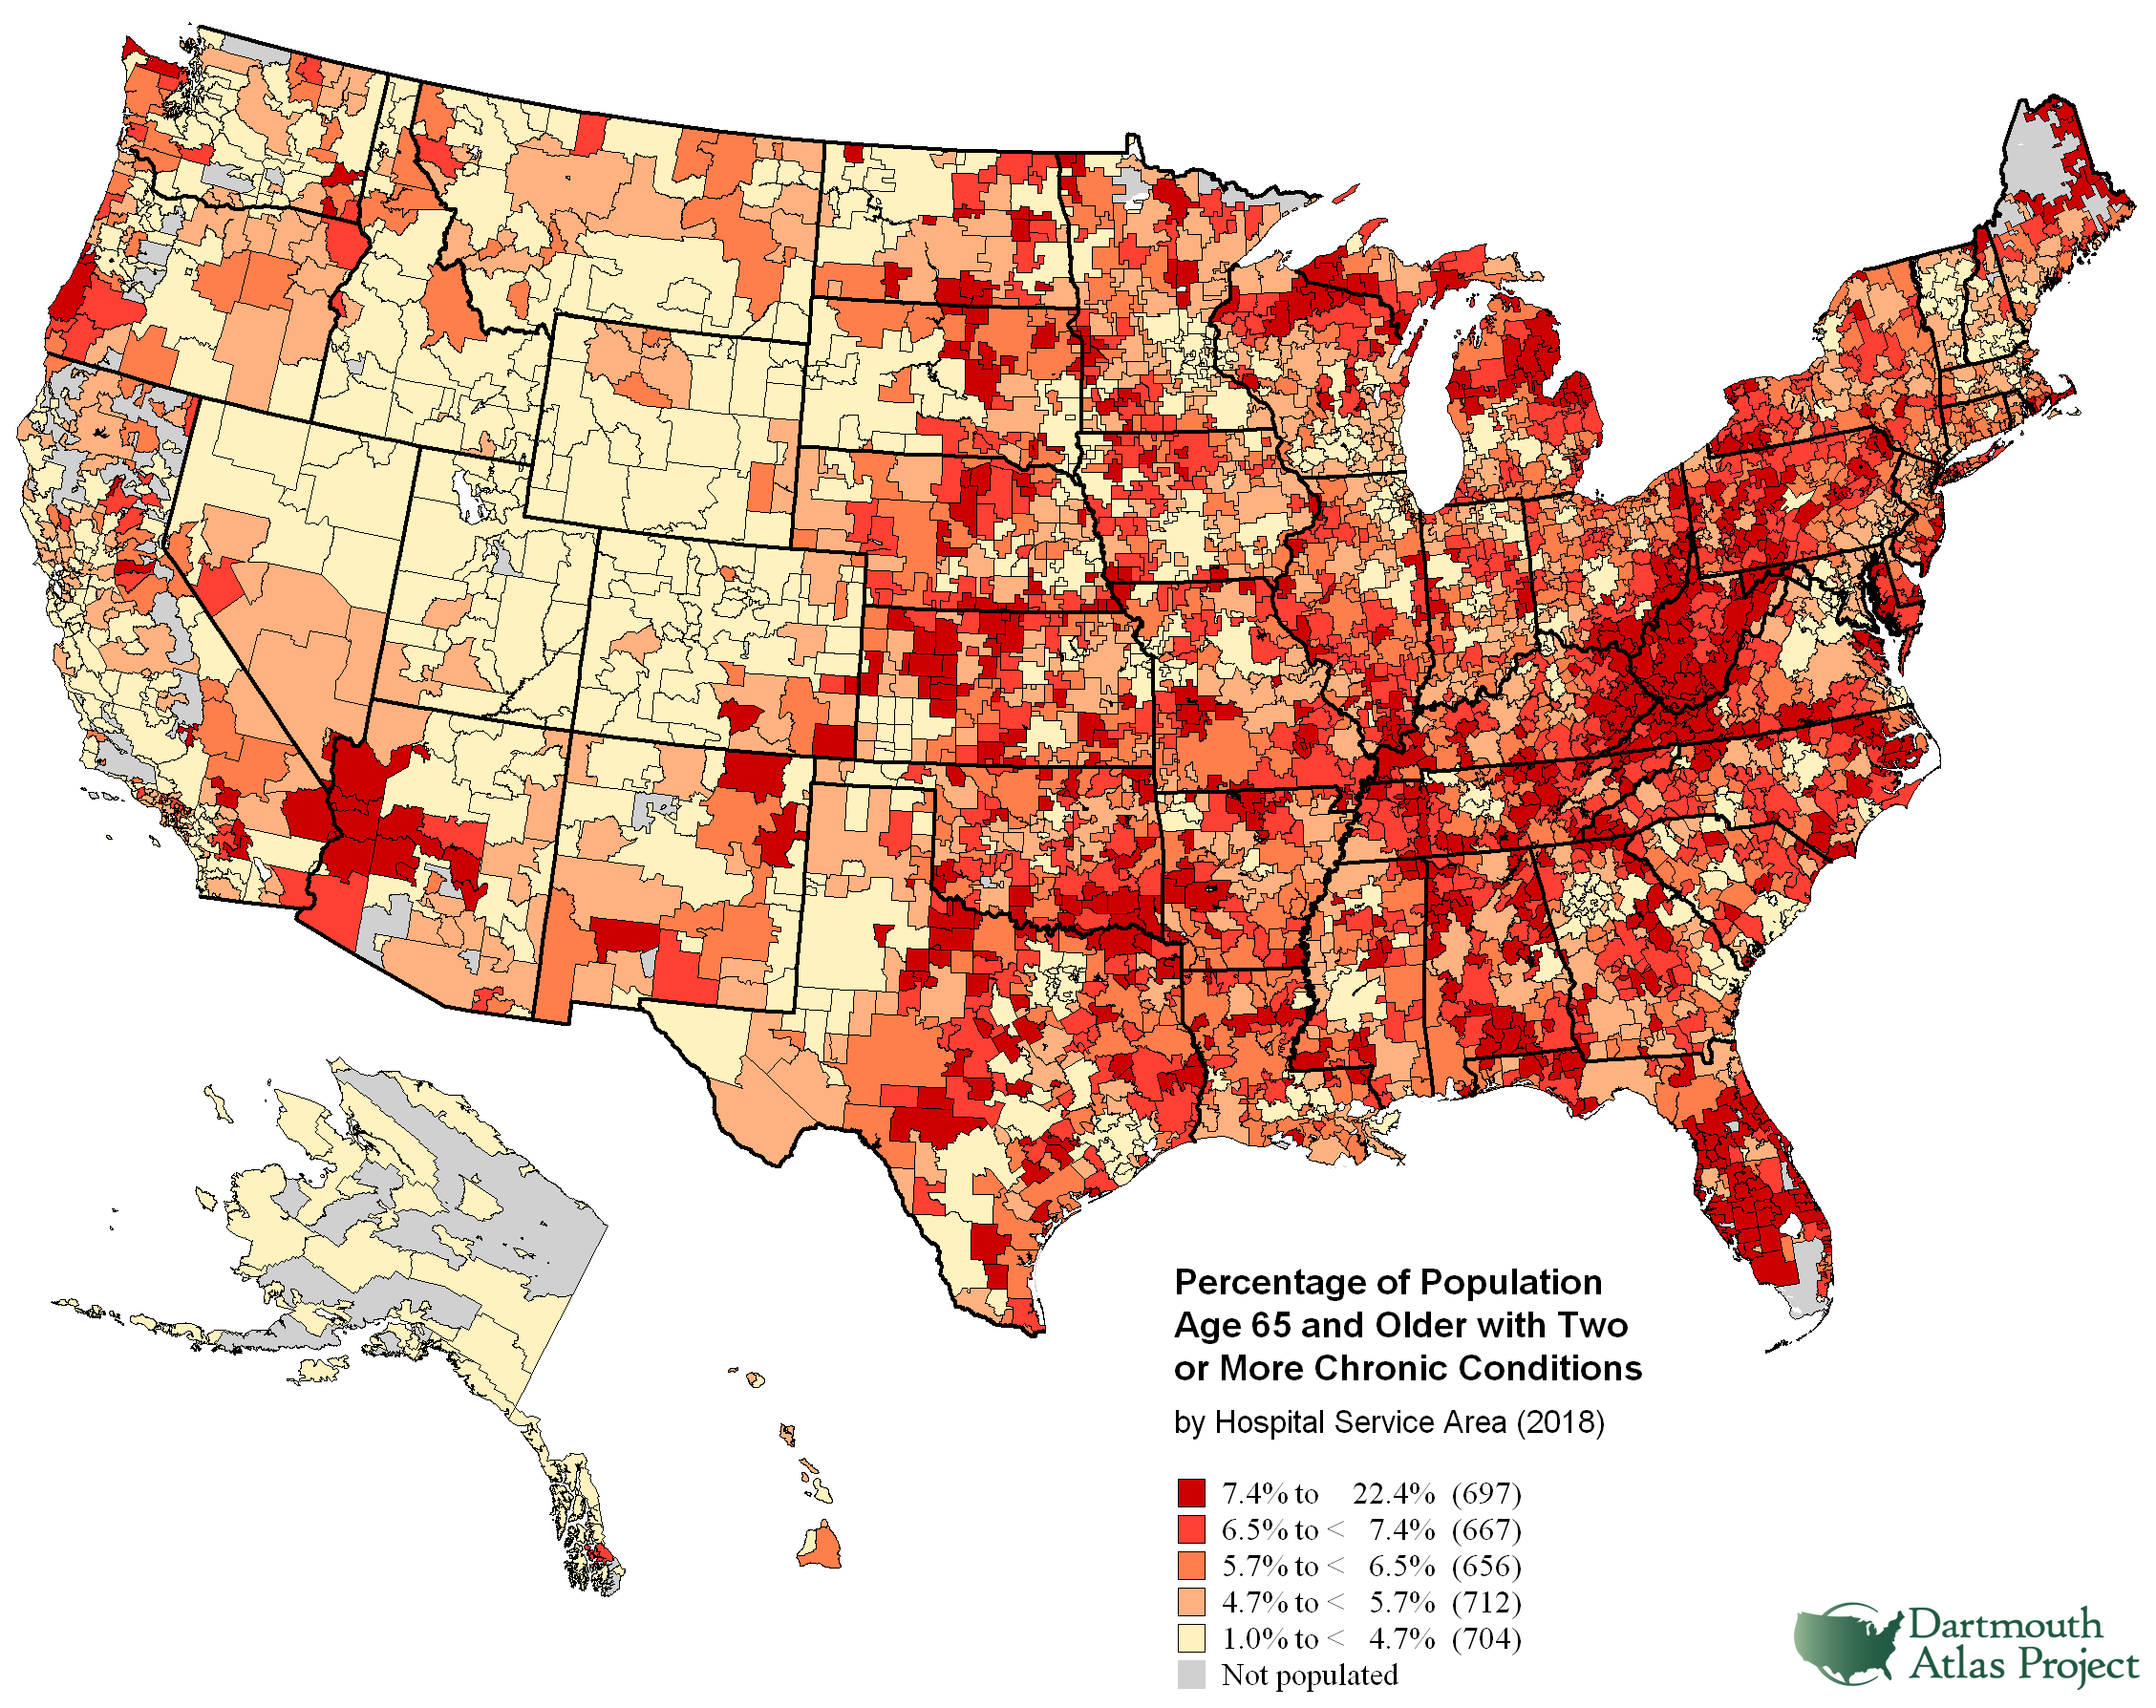 MAP - Percentage of Population Age 65 and Older with Two or More Chronic Conditions, by Hospital Service Area (2018)